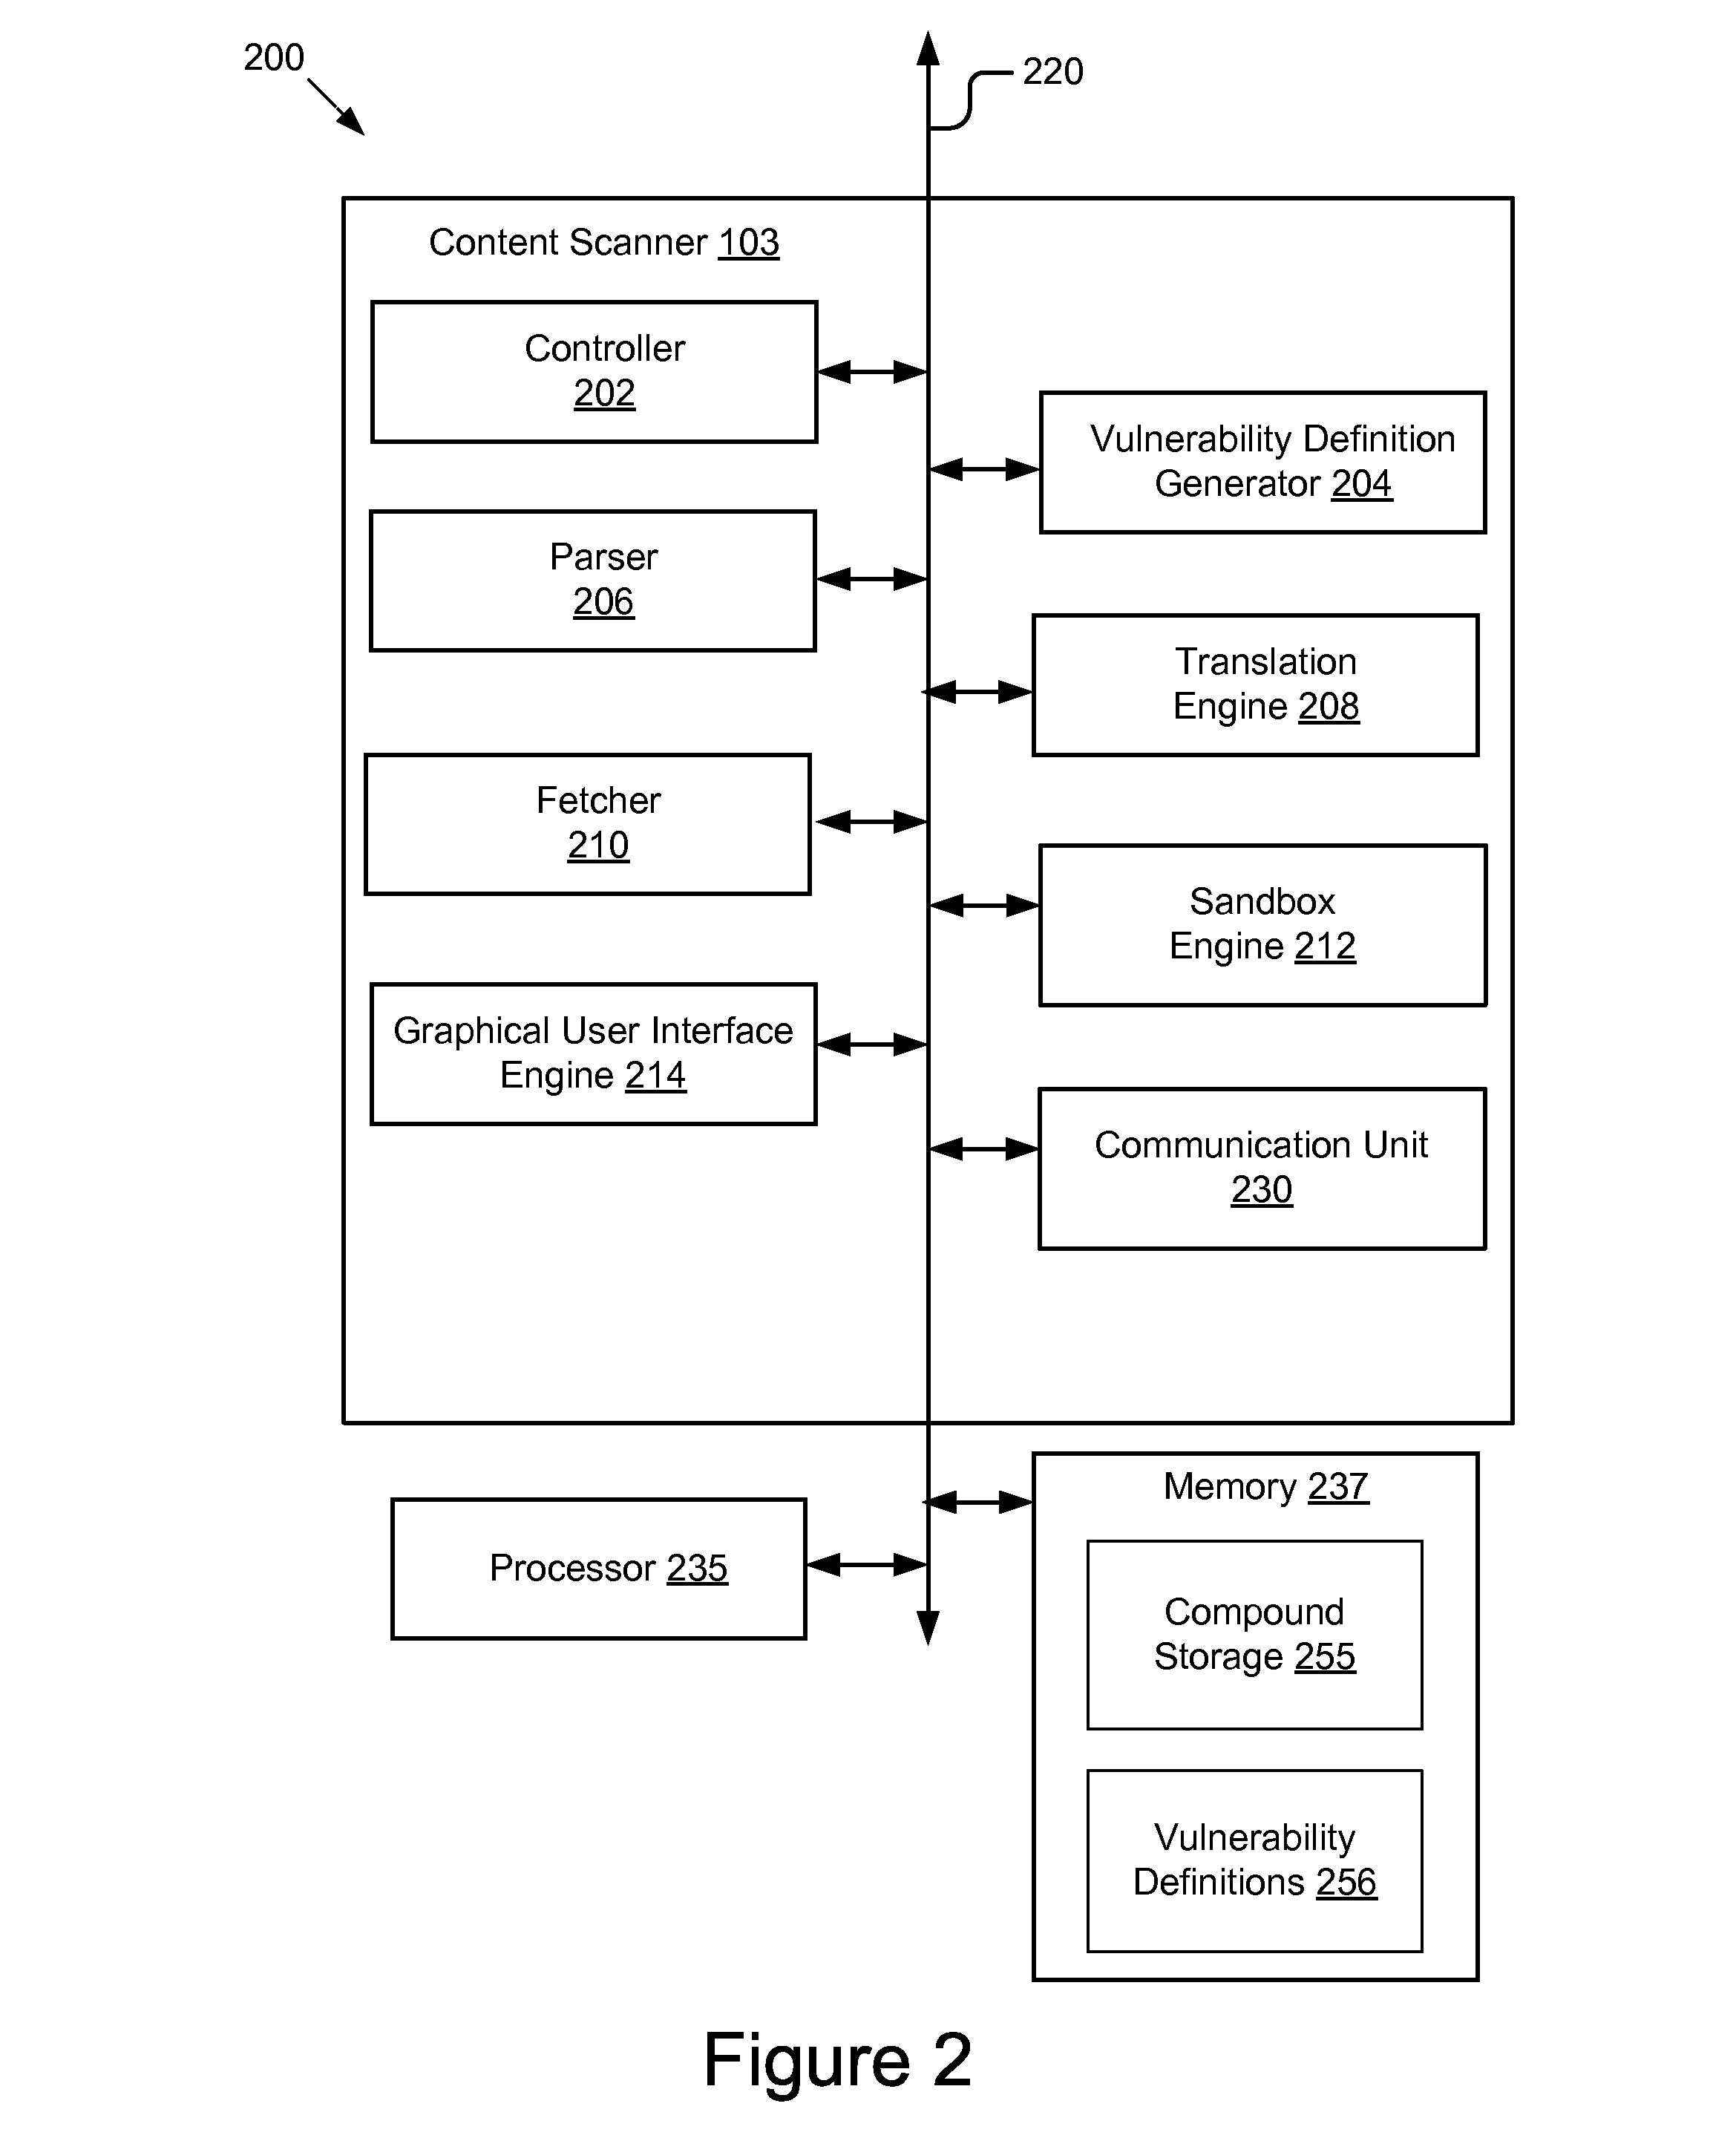 System and method for detecting malicious content